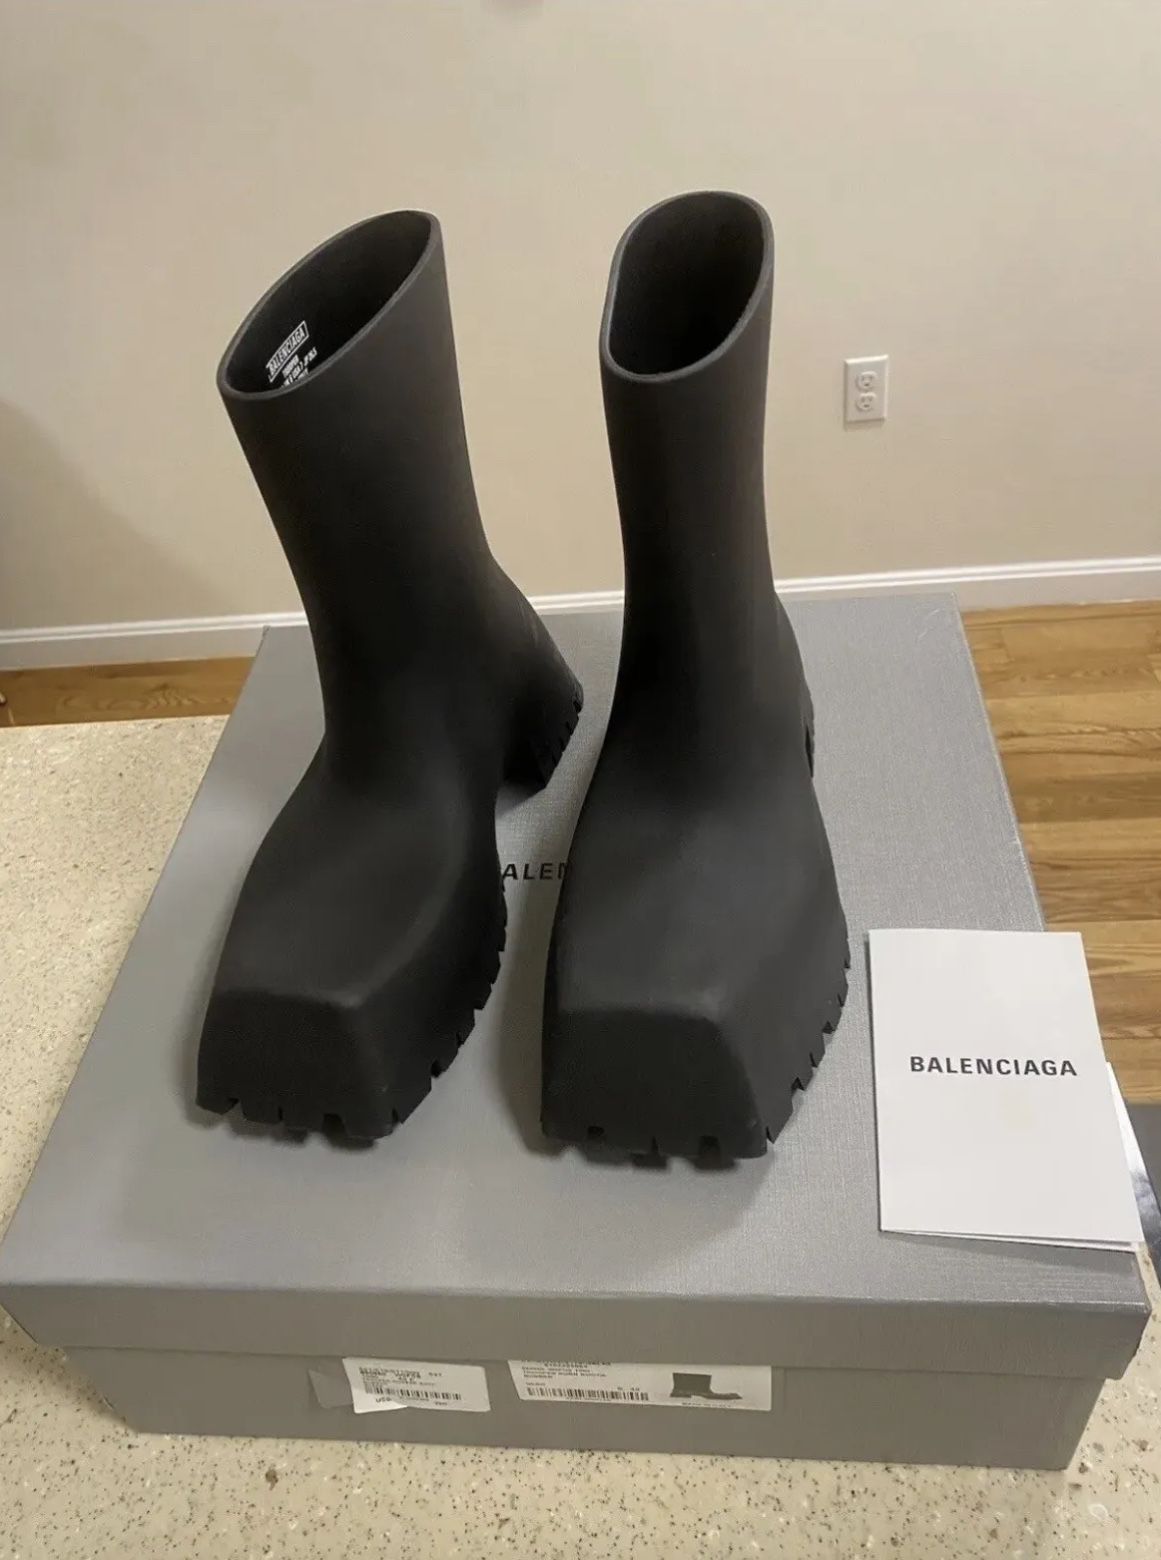 Balenciaga Rubber Trooper Boots Size 40 Used 100% Authentic for men